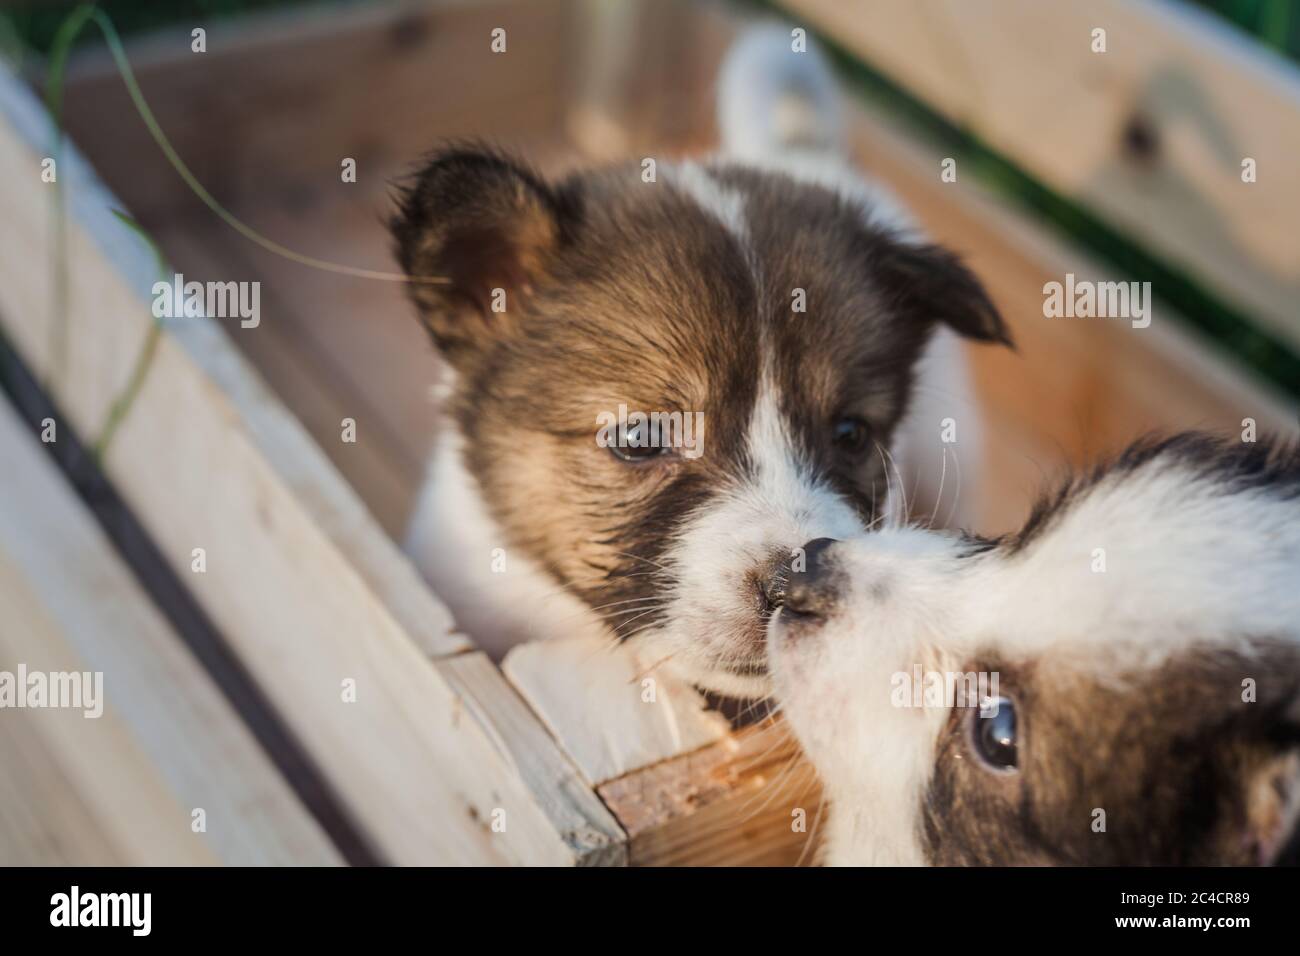 Thai Bangkaew Dog Puppies Are In The Wooden Box On The Grass Stock Photo Alamy